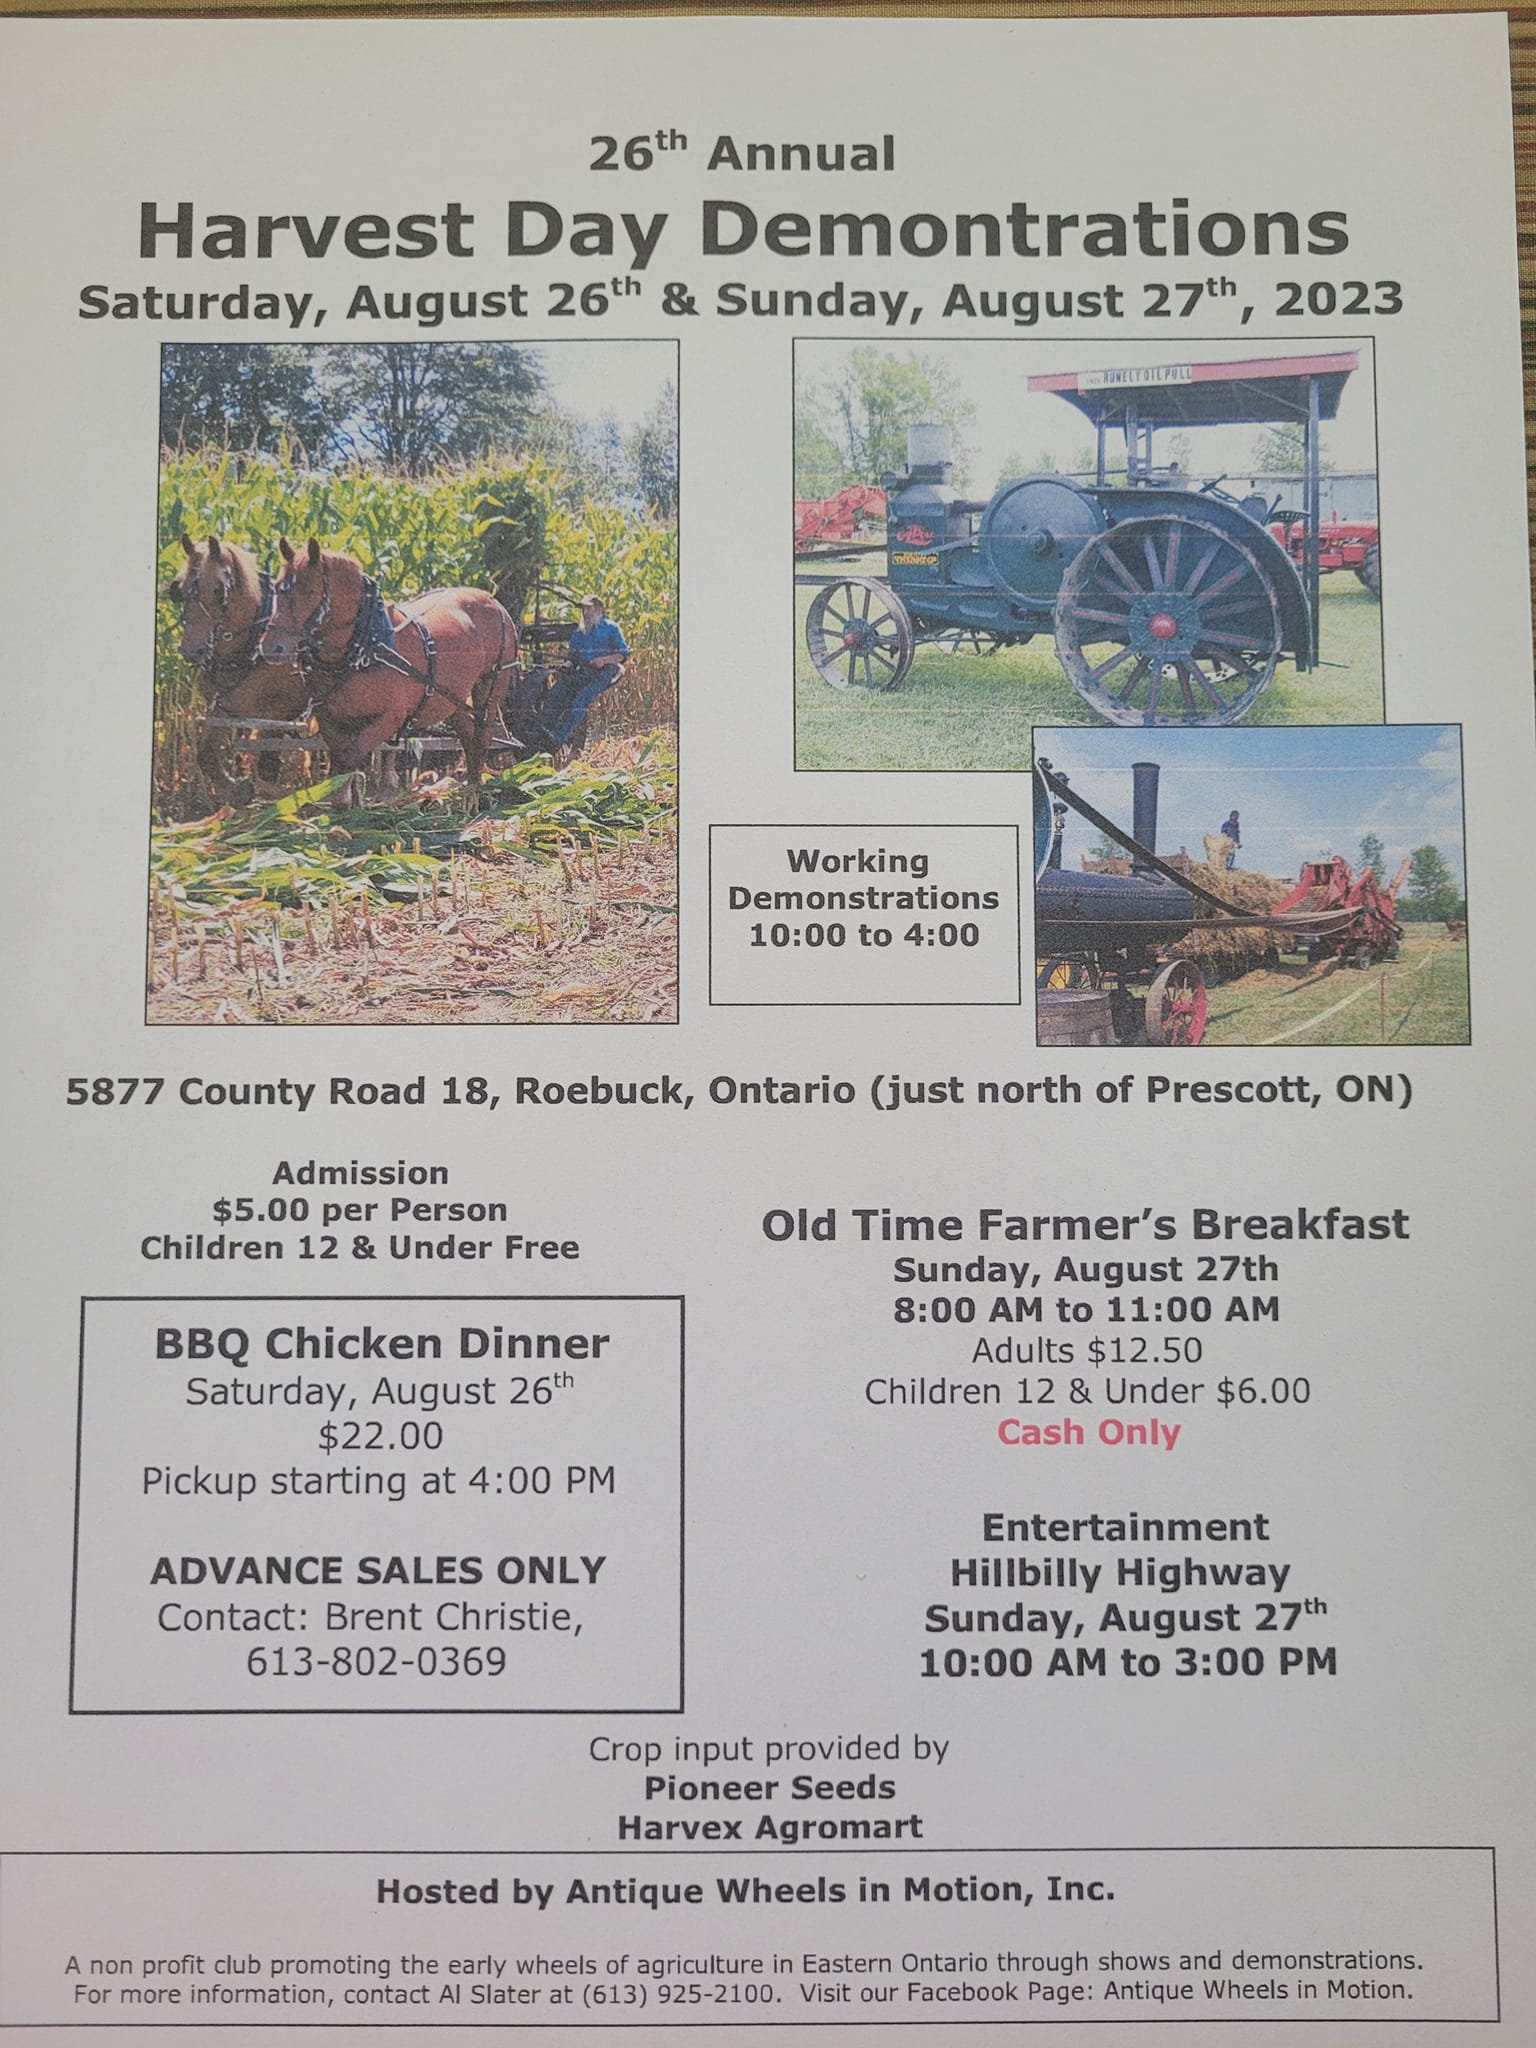 Antique Wheels in Motion Harvest Day Demonstrations on Aug 26-27, 2023.